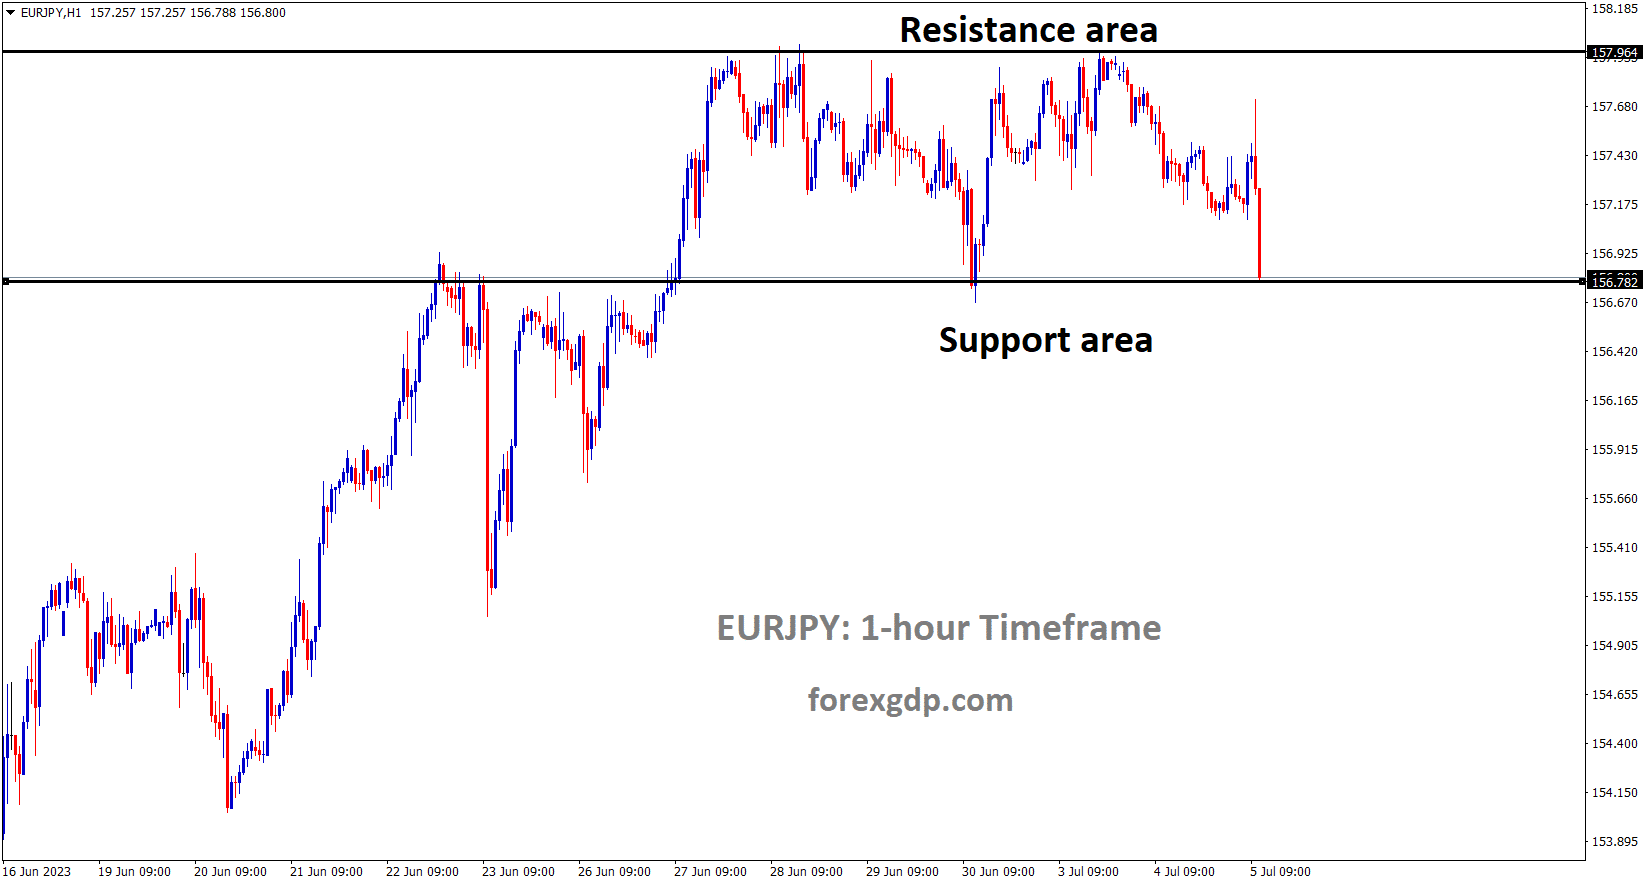 EURJPY is moving in the Box pattern and the market has reached the support area of the pattern